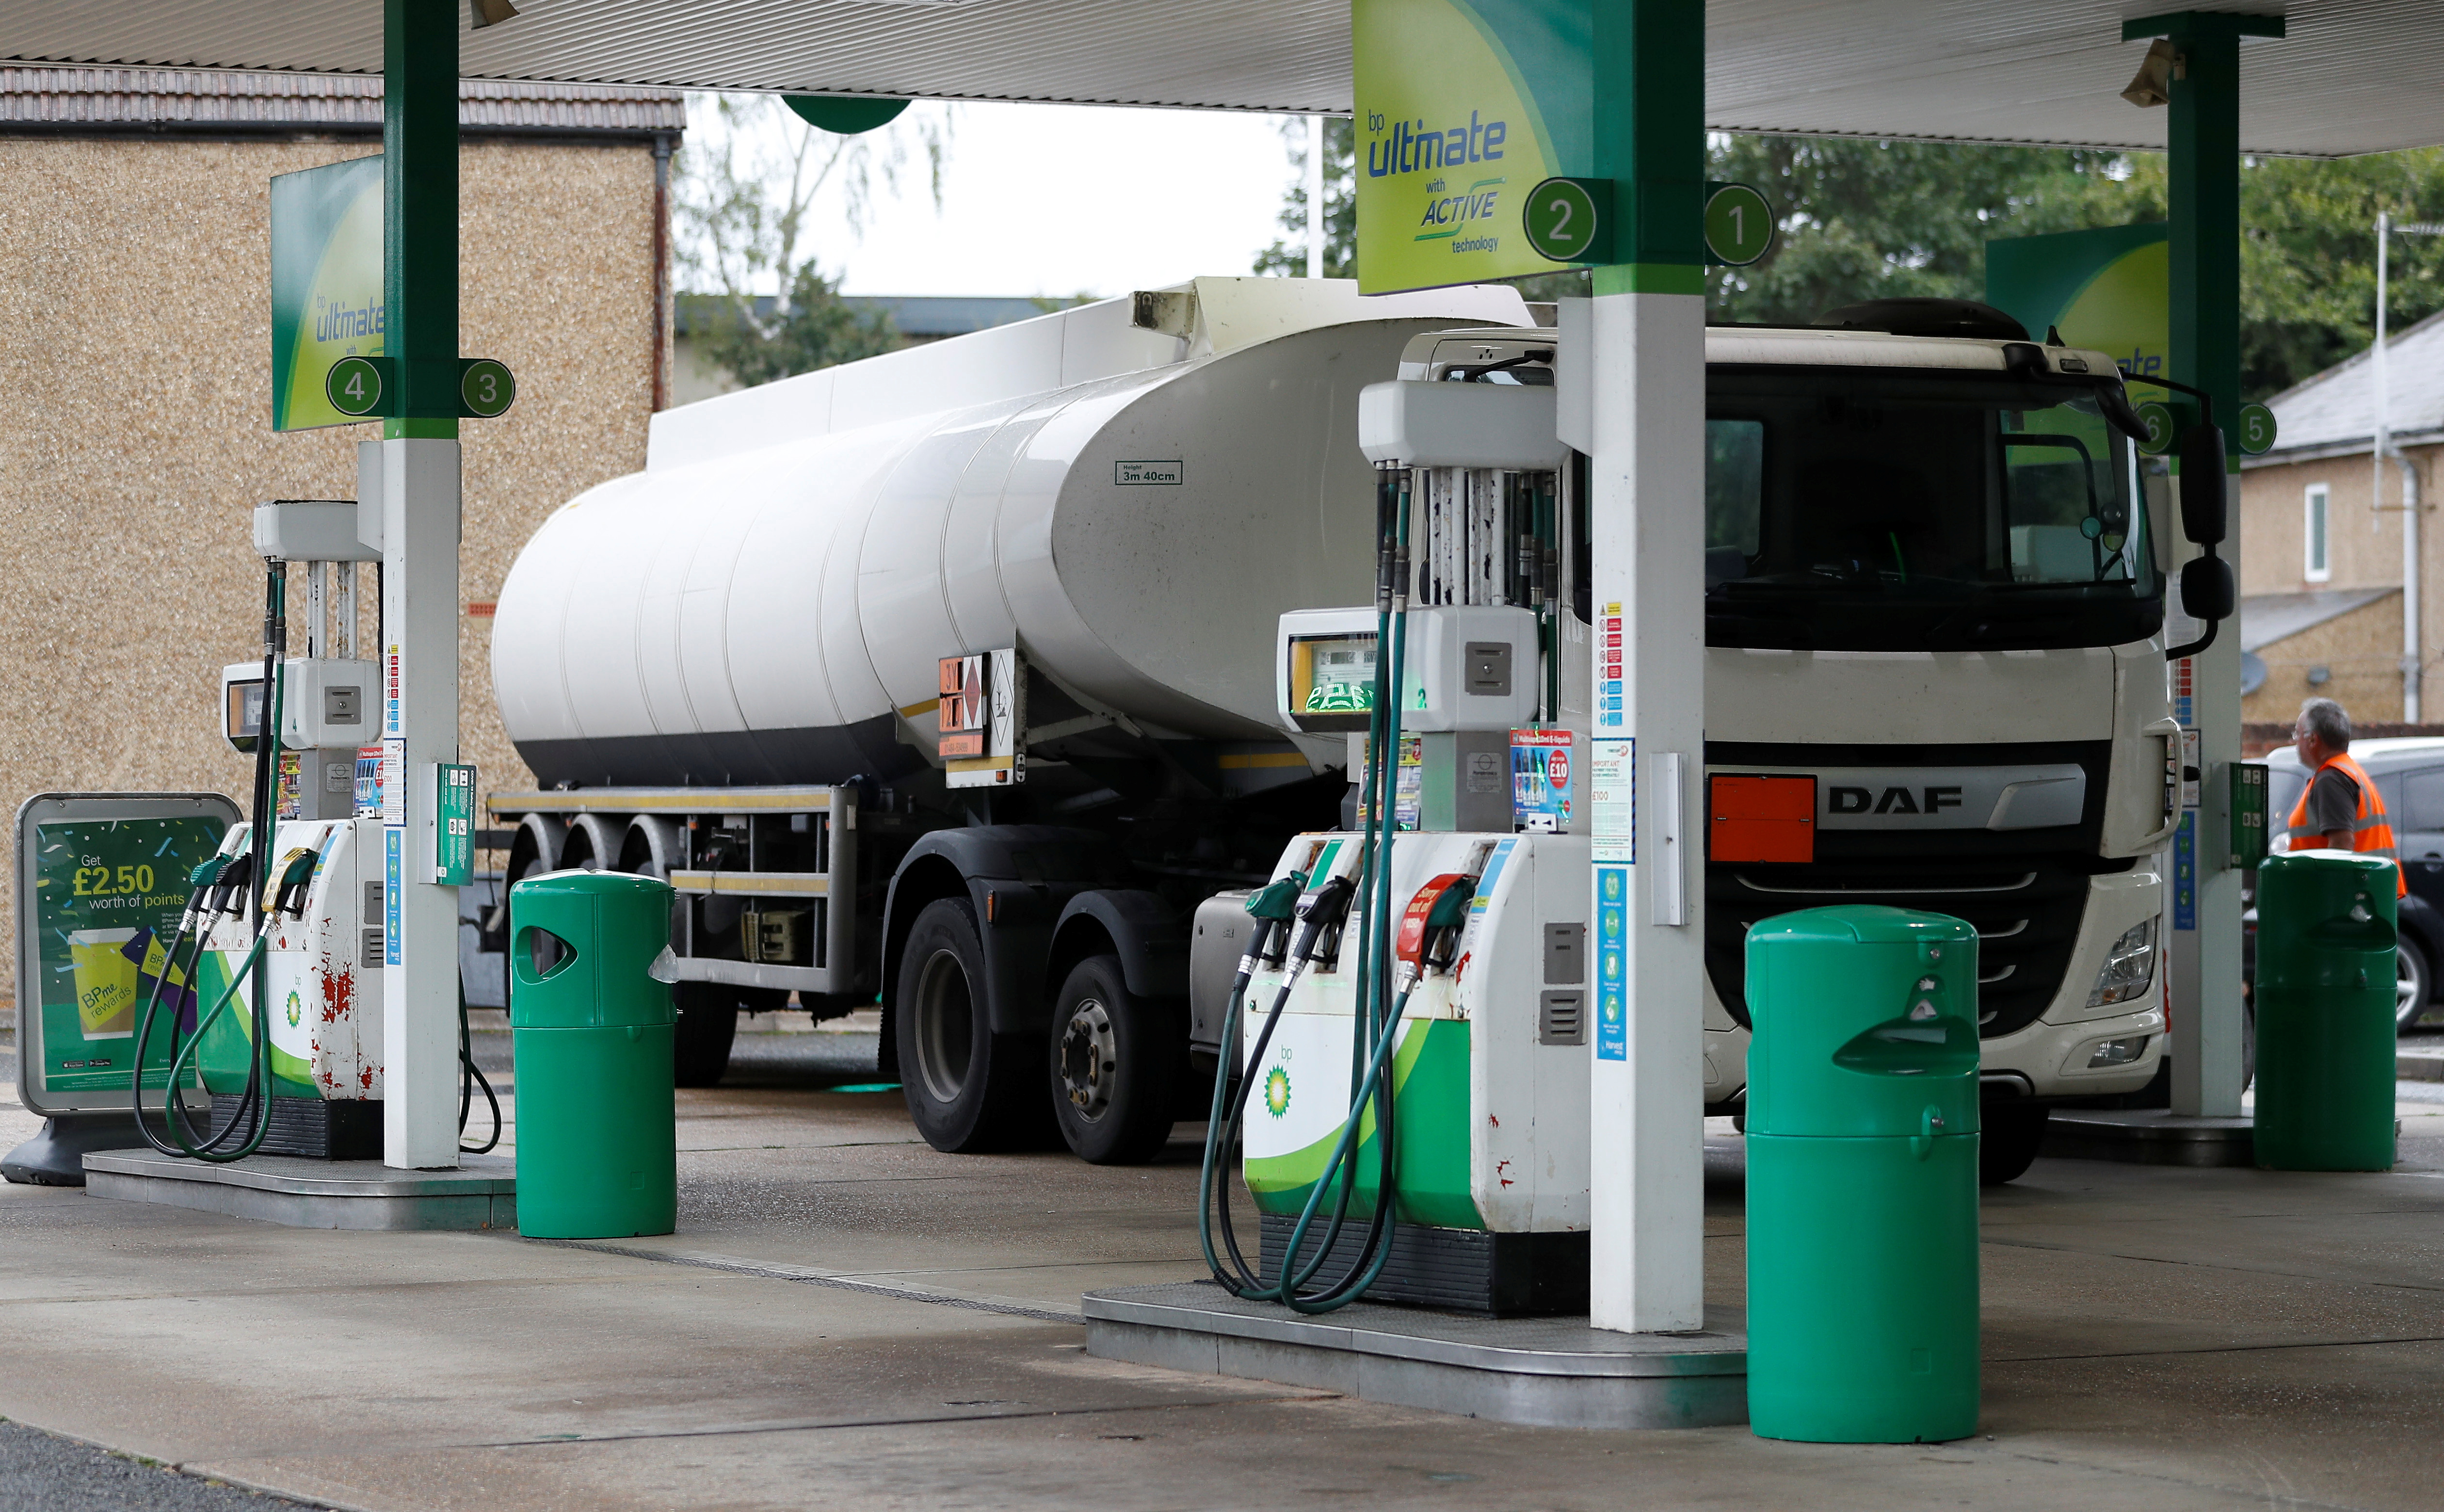 A fuel tanker is parked during a fuel delivery to a BP filling station in Hersham